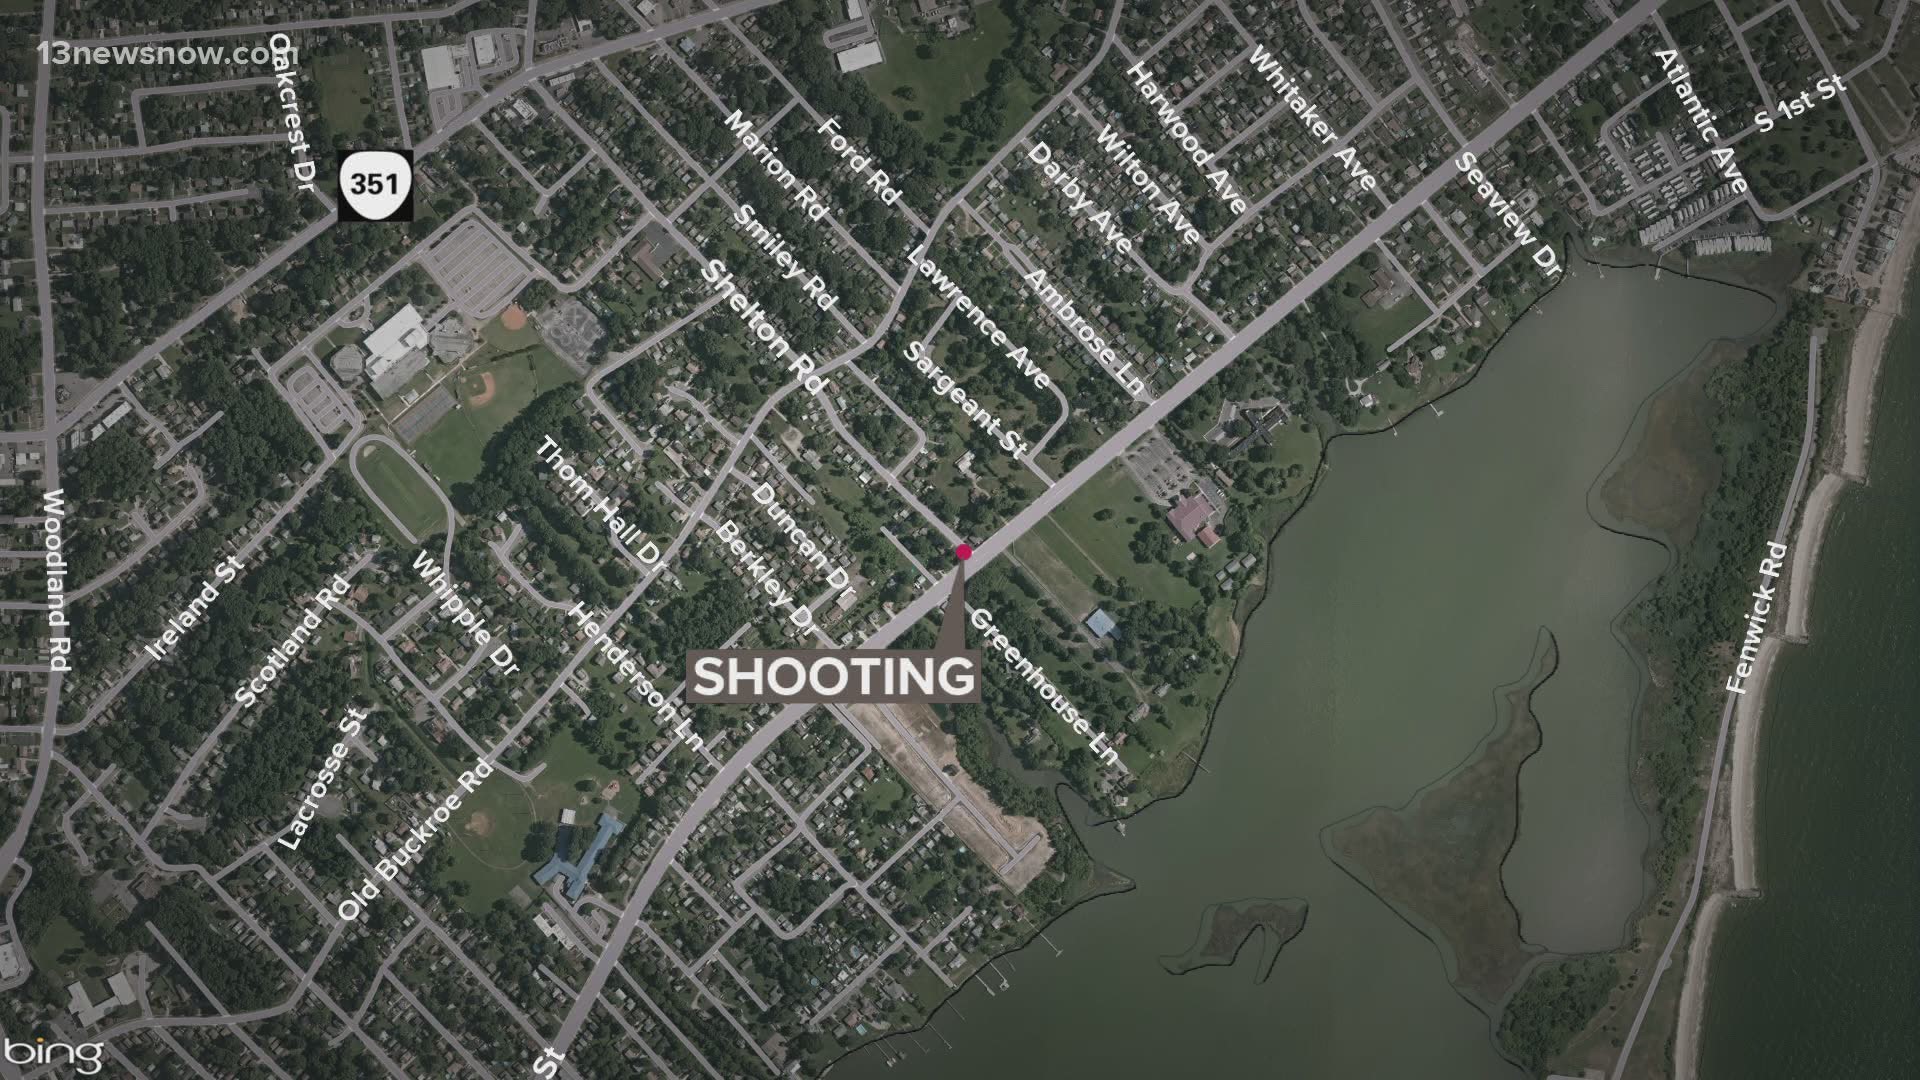 Hampton police said a 31-year-old man died after being shot inside a house located in the first block of Shelton Road.